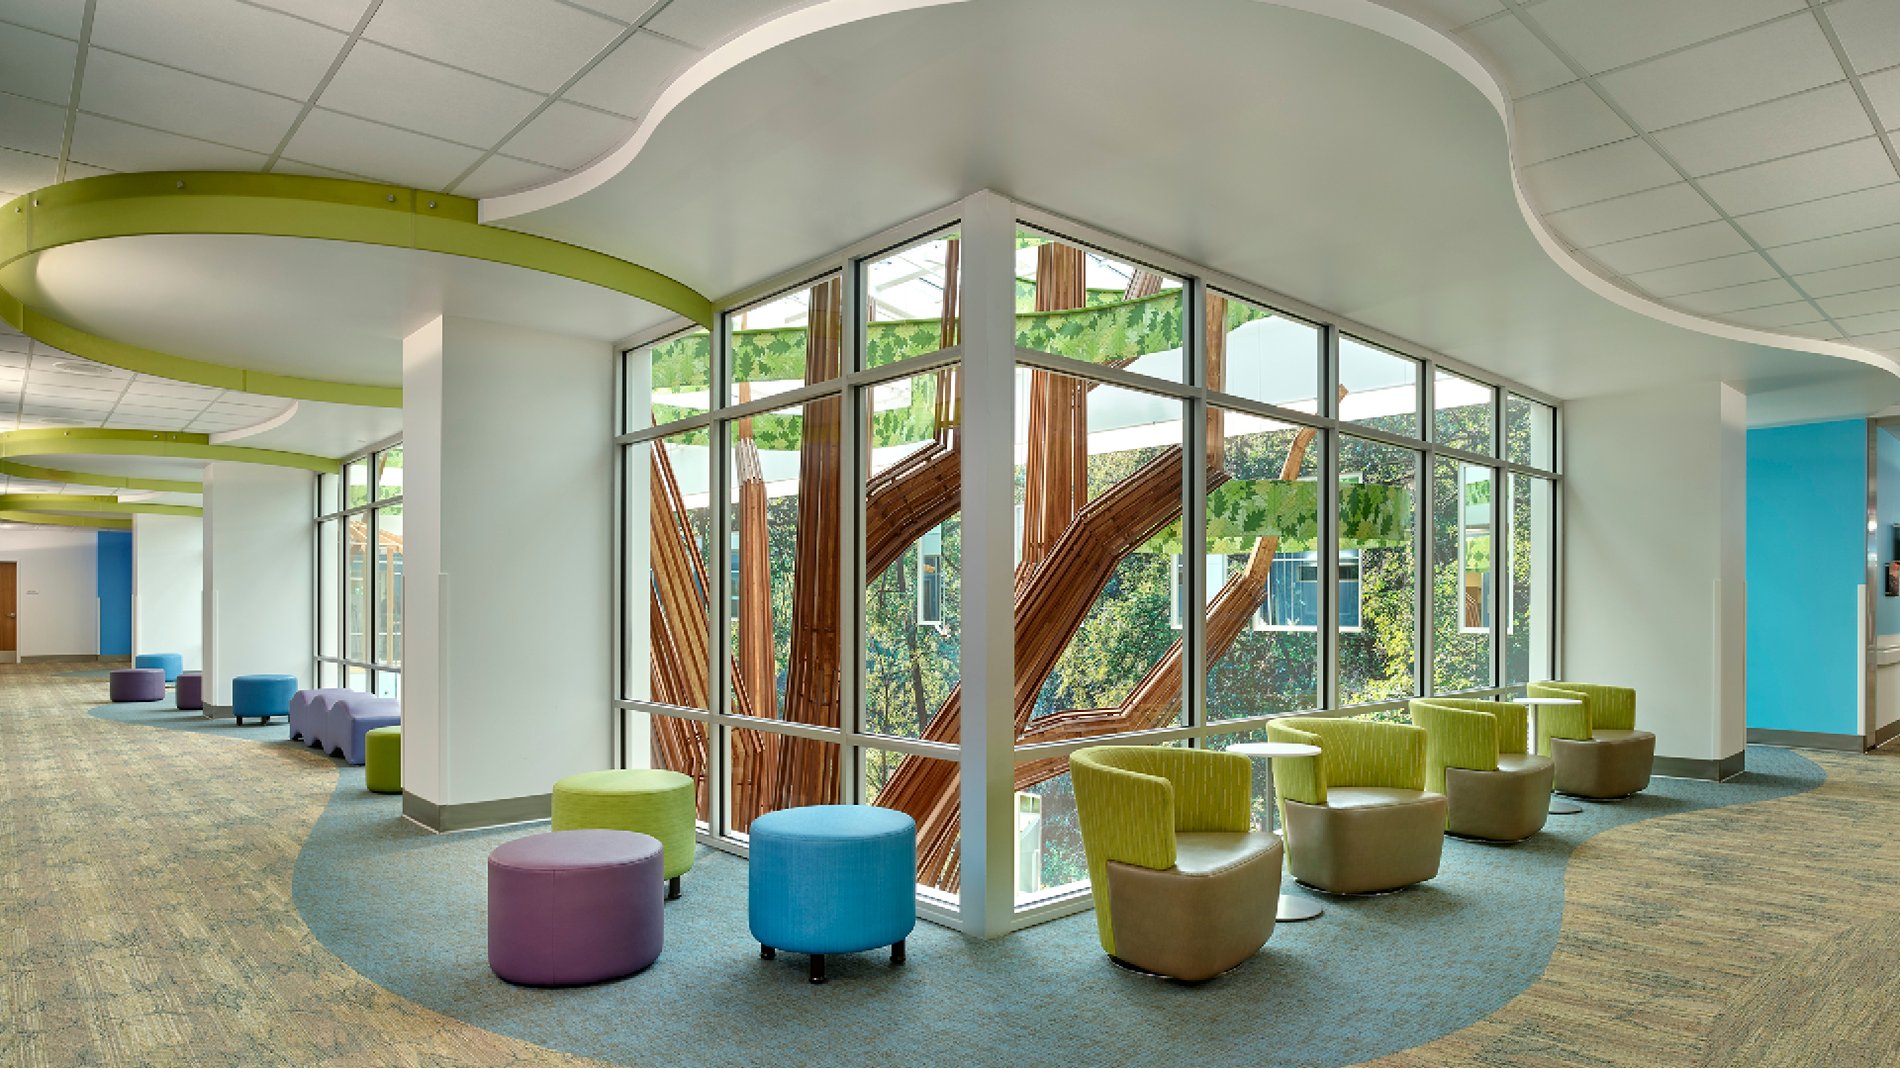 Inside a hallway in Beacon Children's Hospital, with colorful furniture and a view of the playful tree sculpture in the atrium.